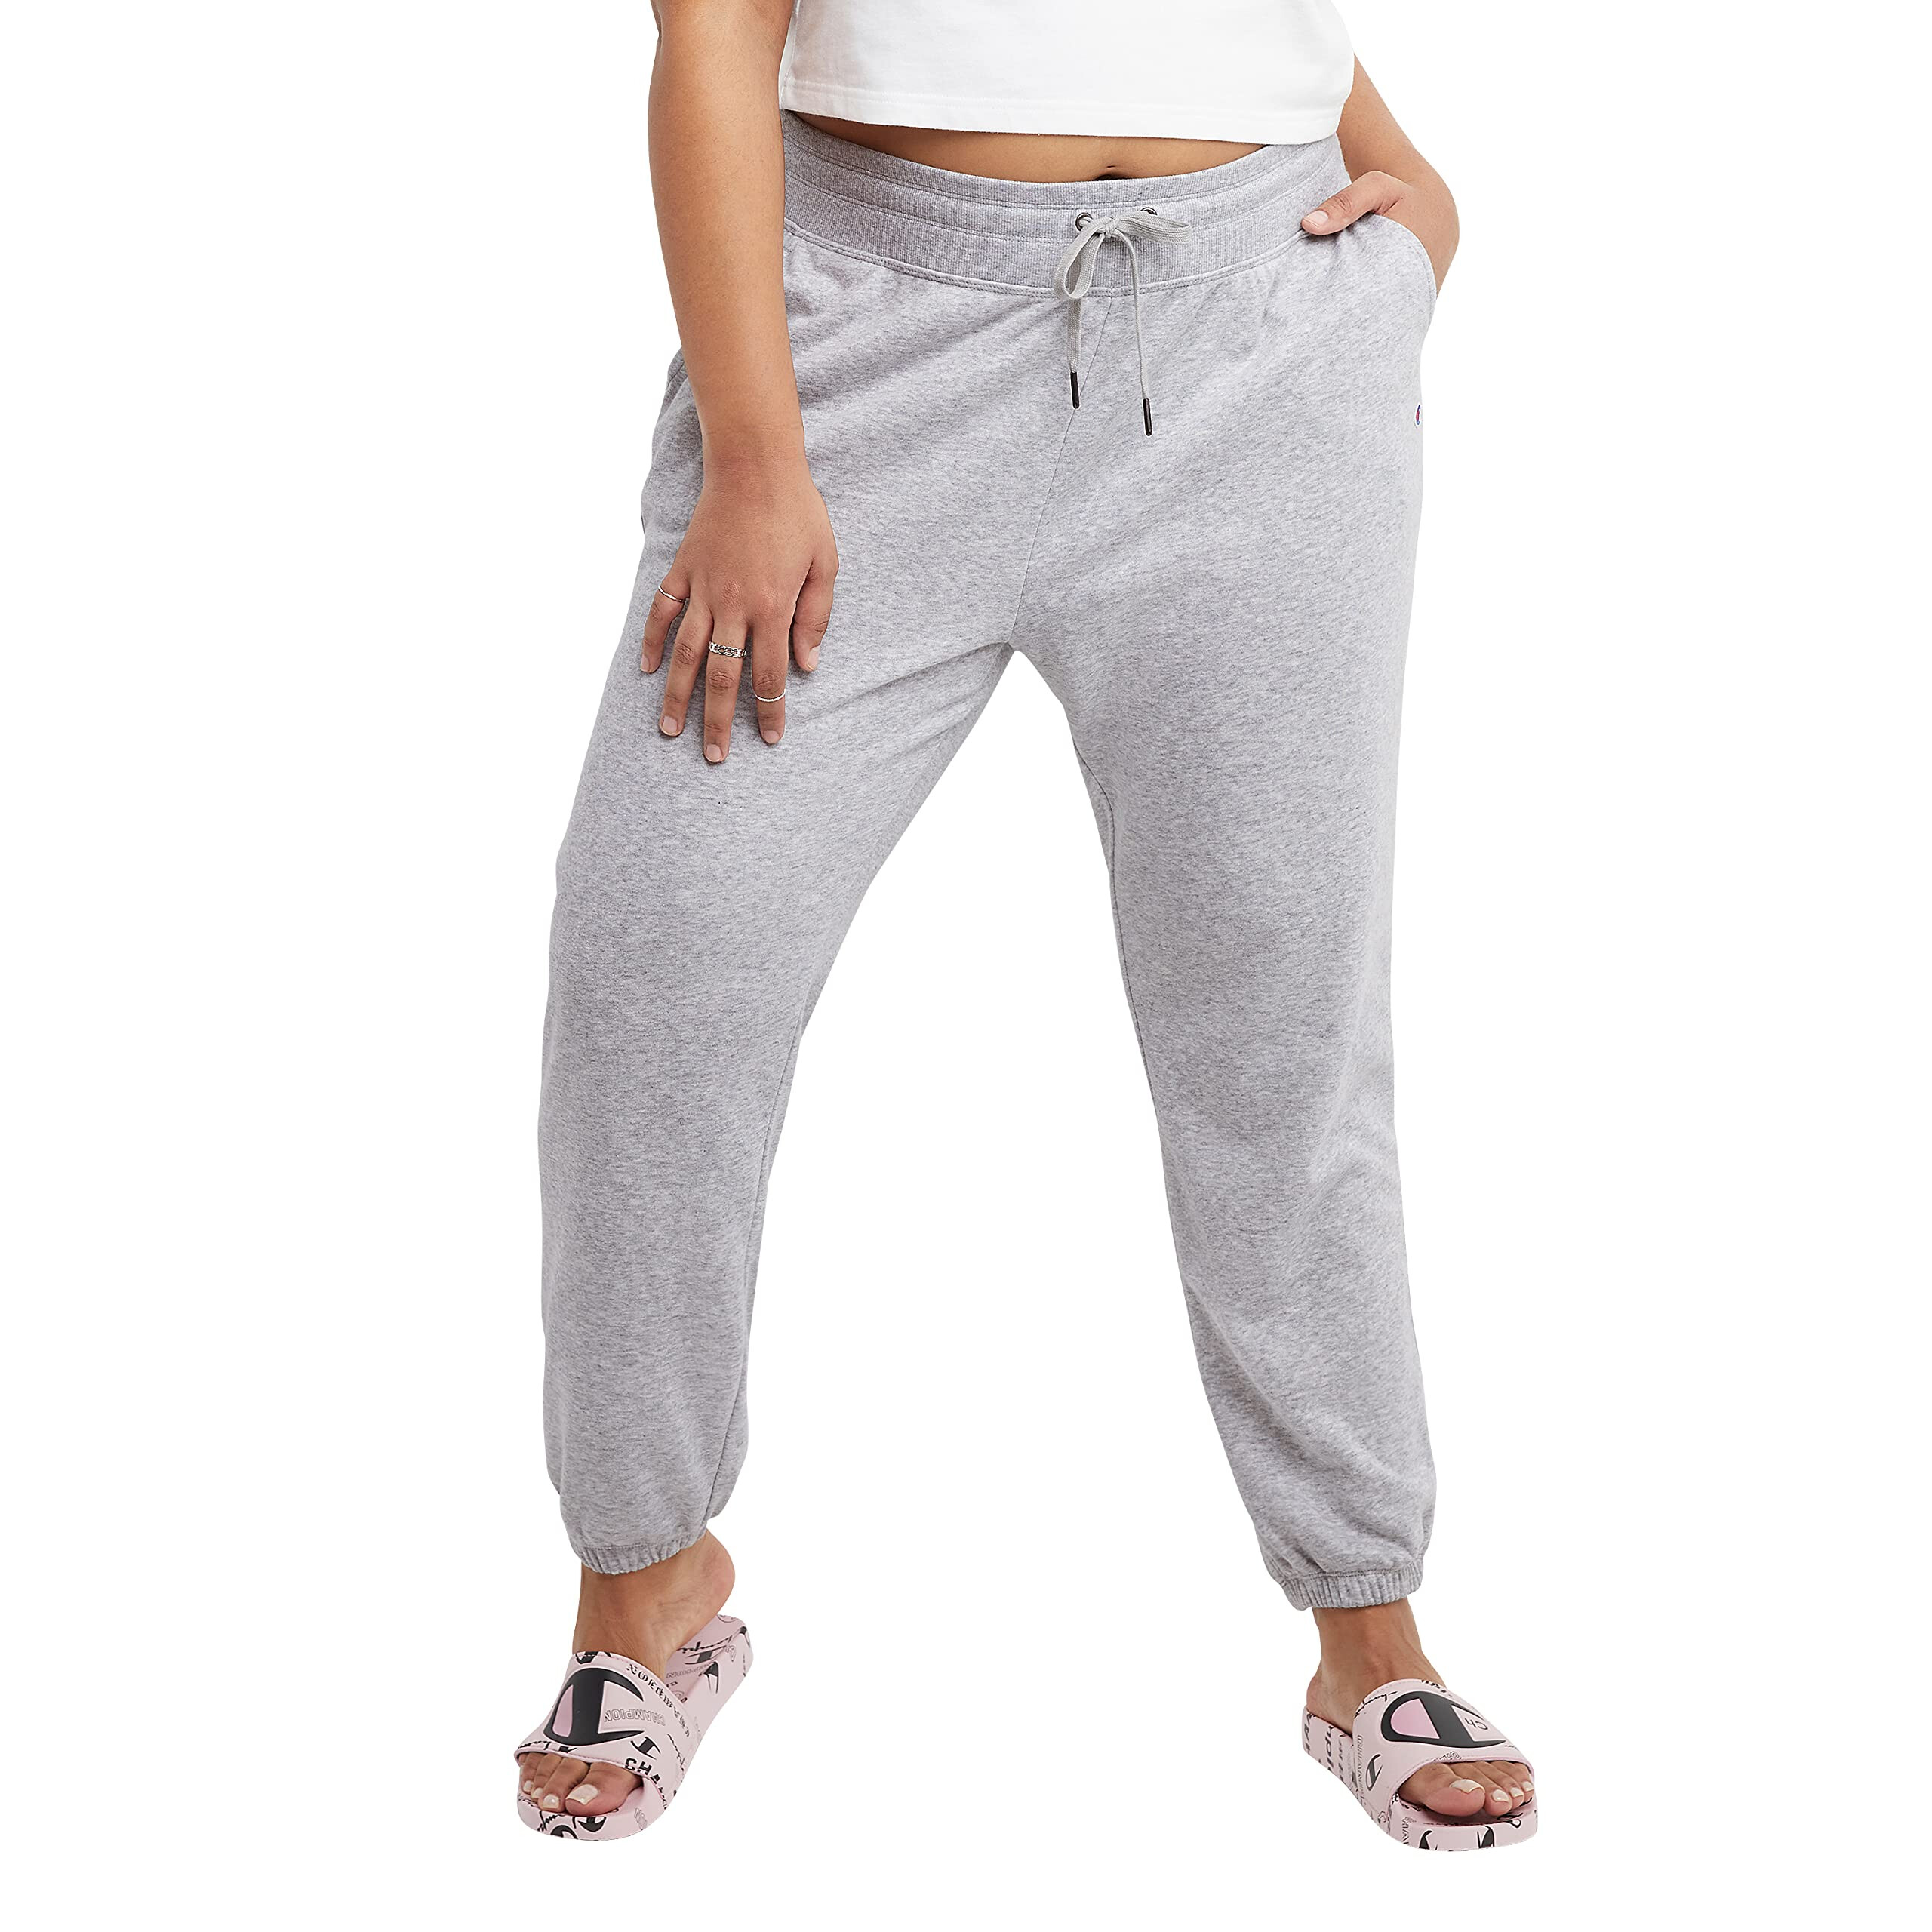 Imbracaminte Femei Champion Plus Size Campus French Terry Sweat Pants Oxford Gray